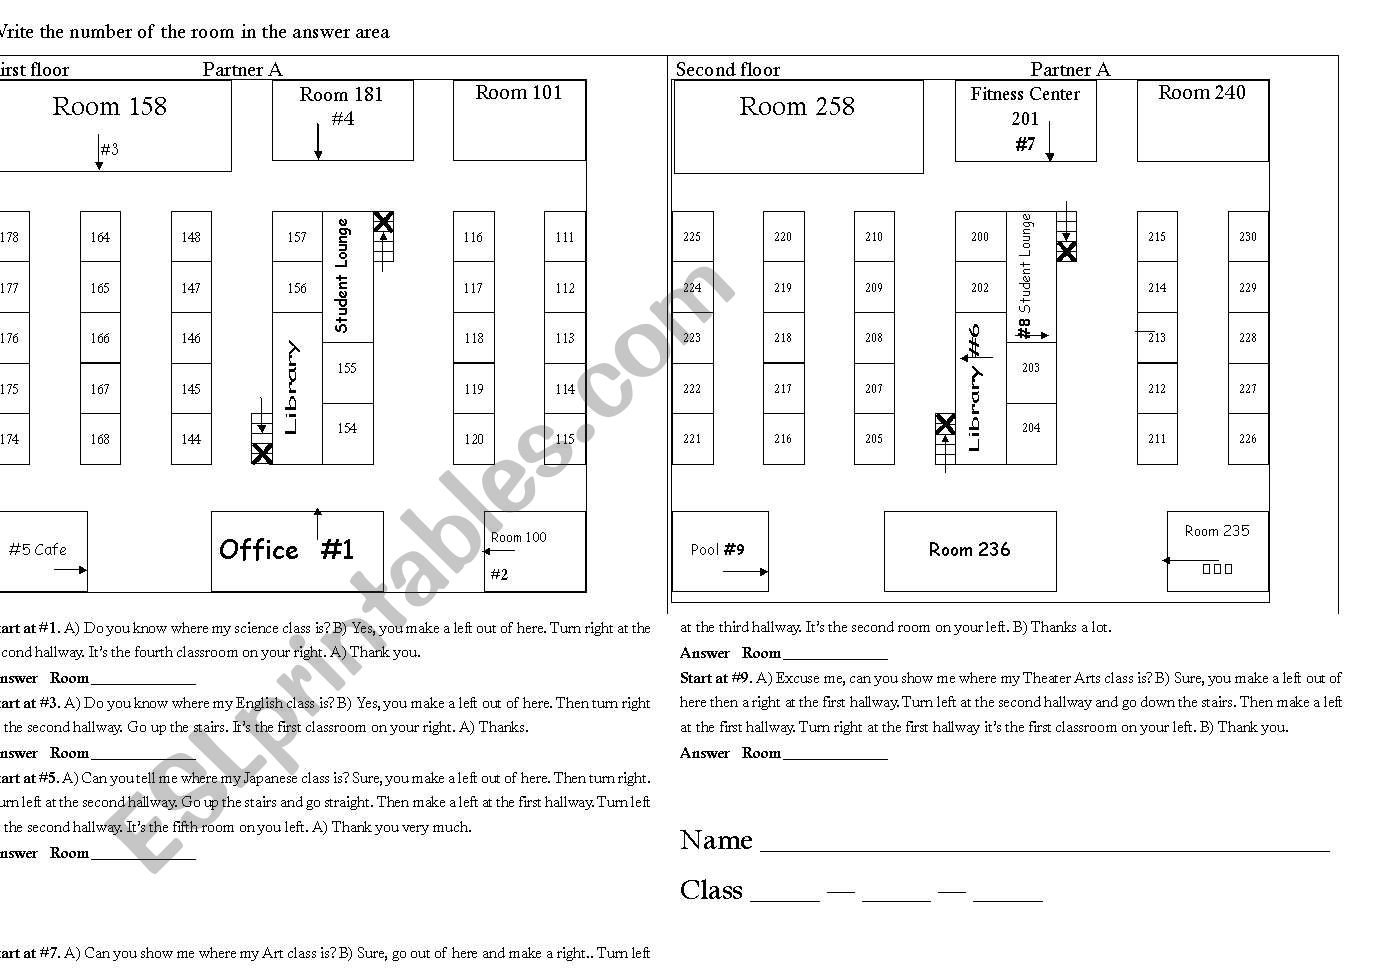 School Map Activity  Esl Worksheetroachripjp Pertaining To Map Activity Worksheets